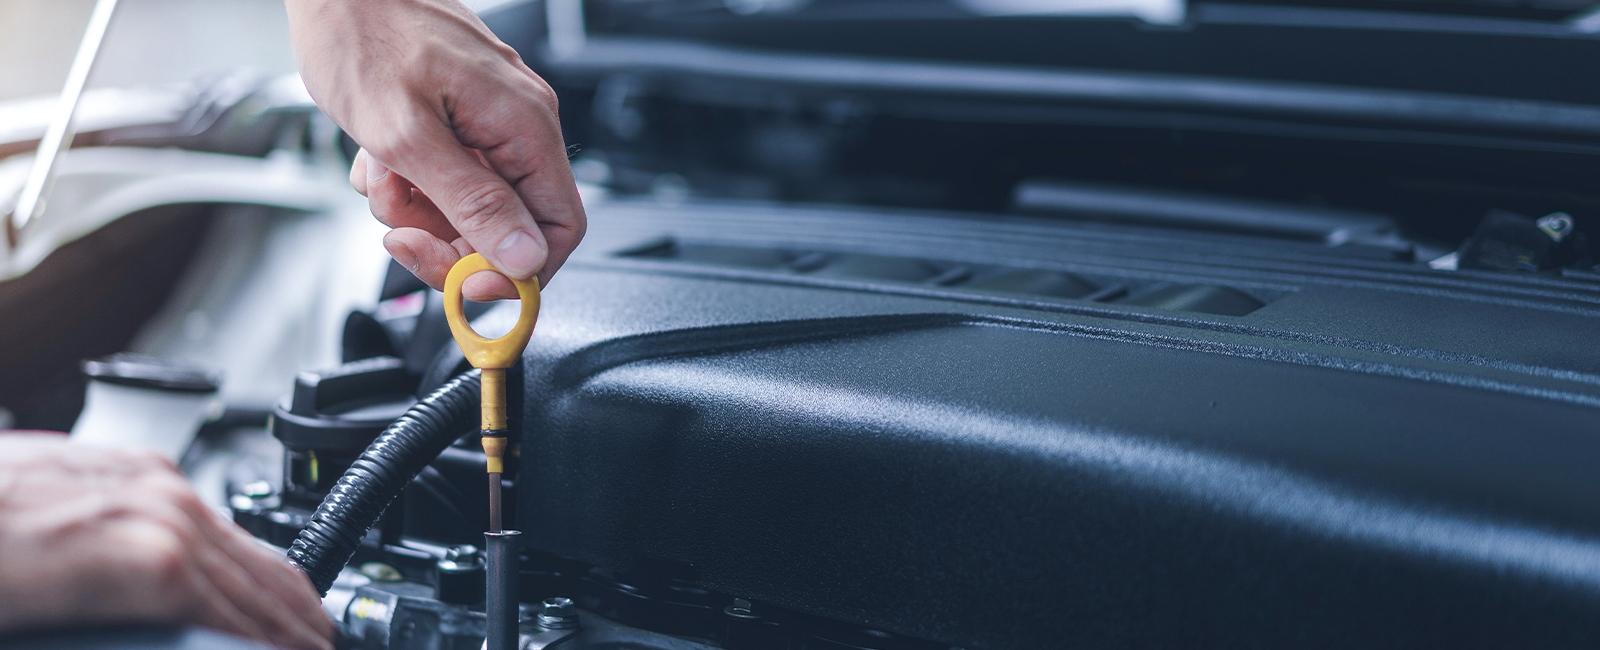 Fix the engine oil leak problem in your car